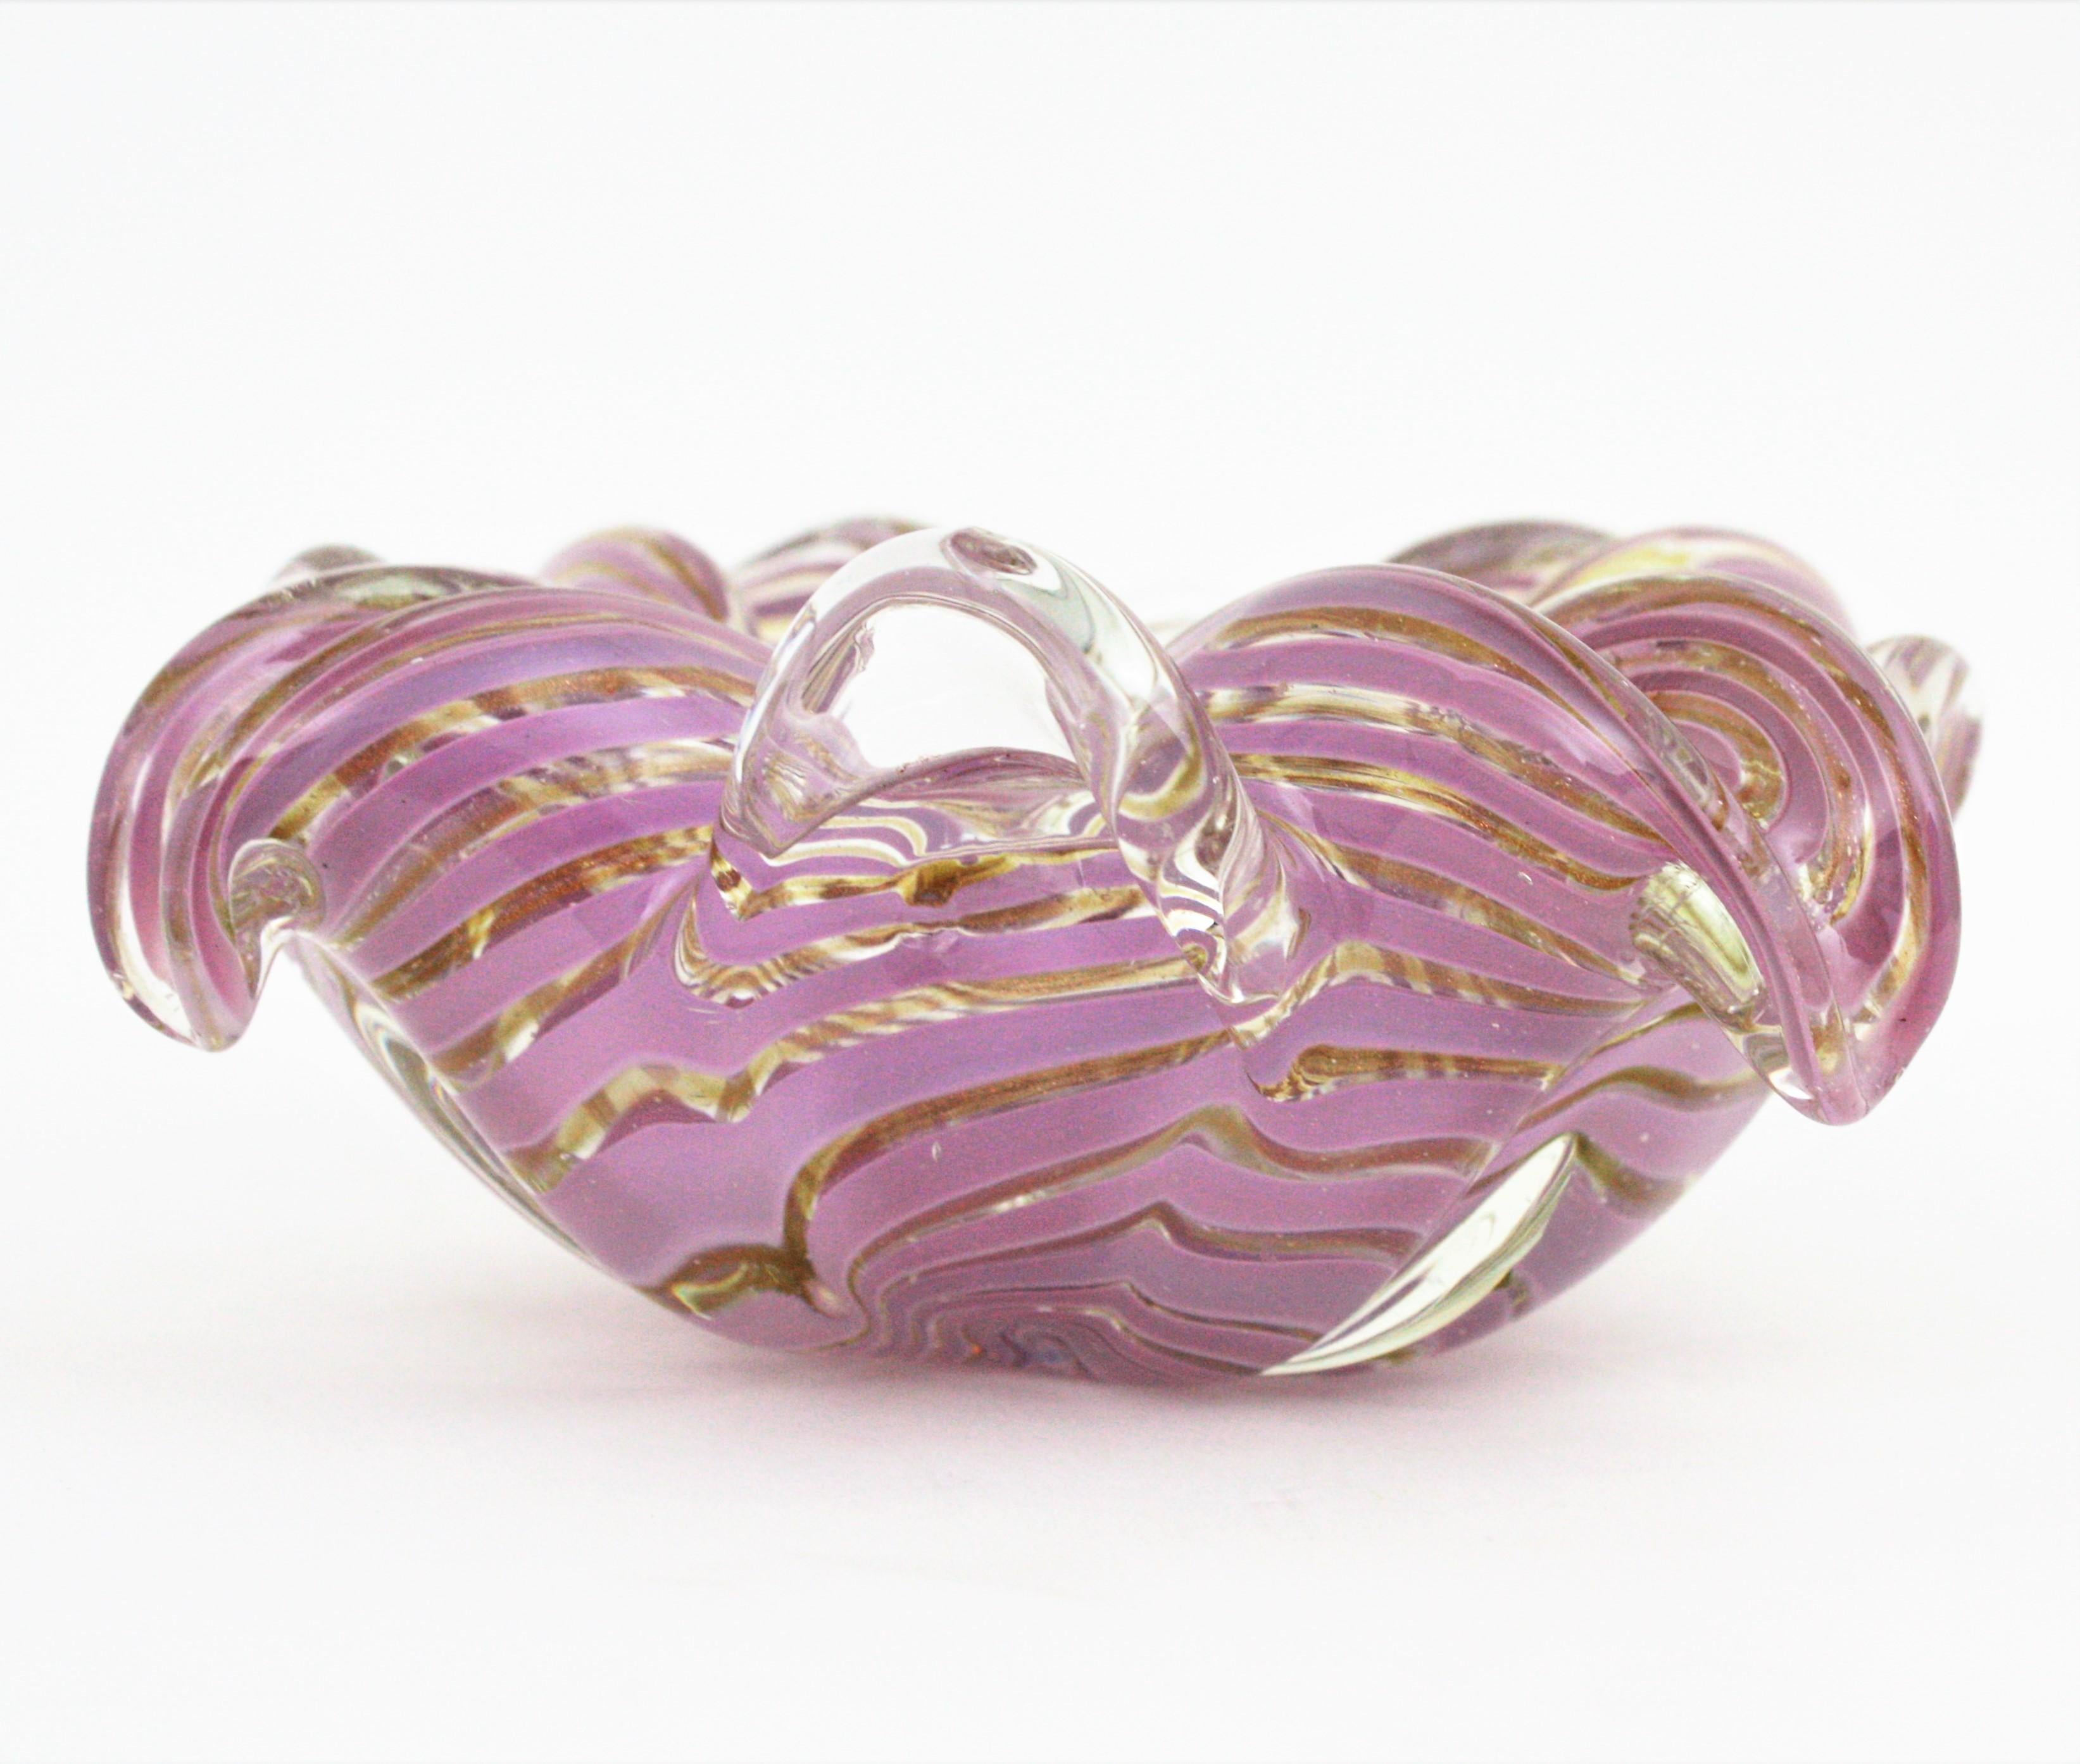 Fratelli Toso Murano Glass Lilac Swirl Ribbons & Gold Dust Large Bowl / Ashtray en vente 8